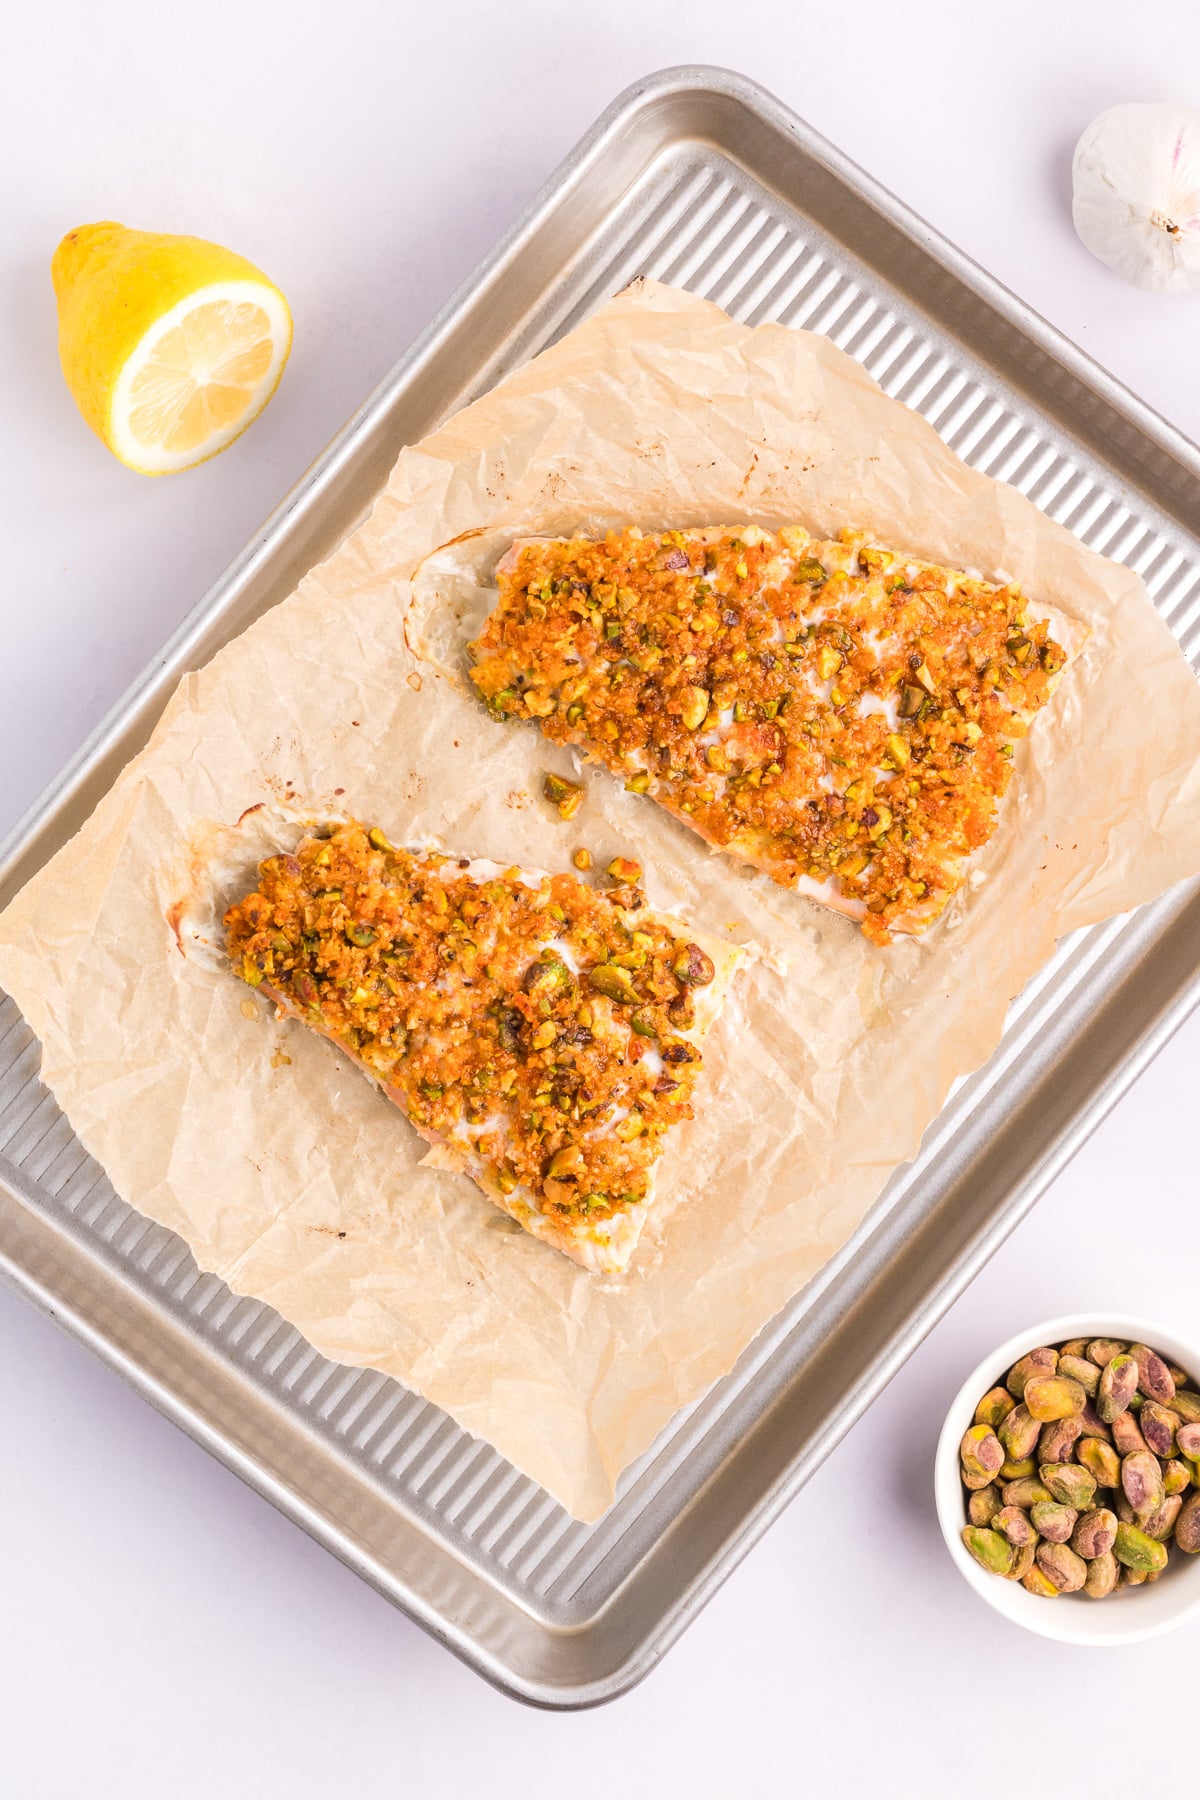 Two salmon fillets on a baking sheet with a pistachio after baking.